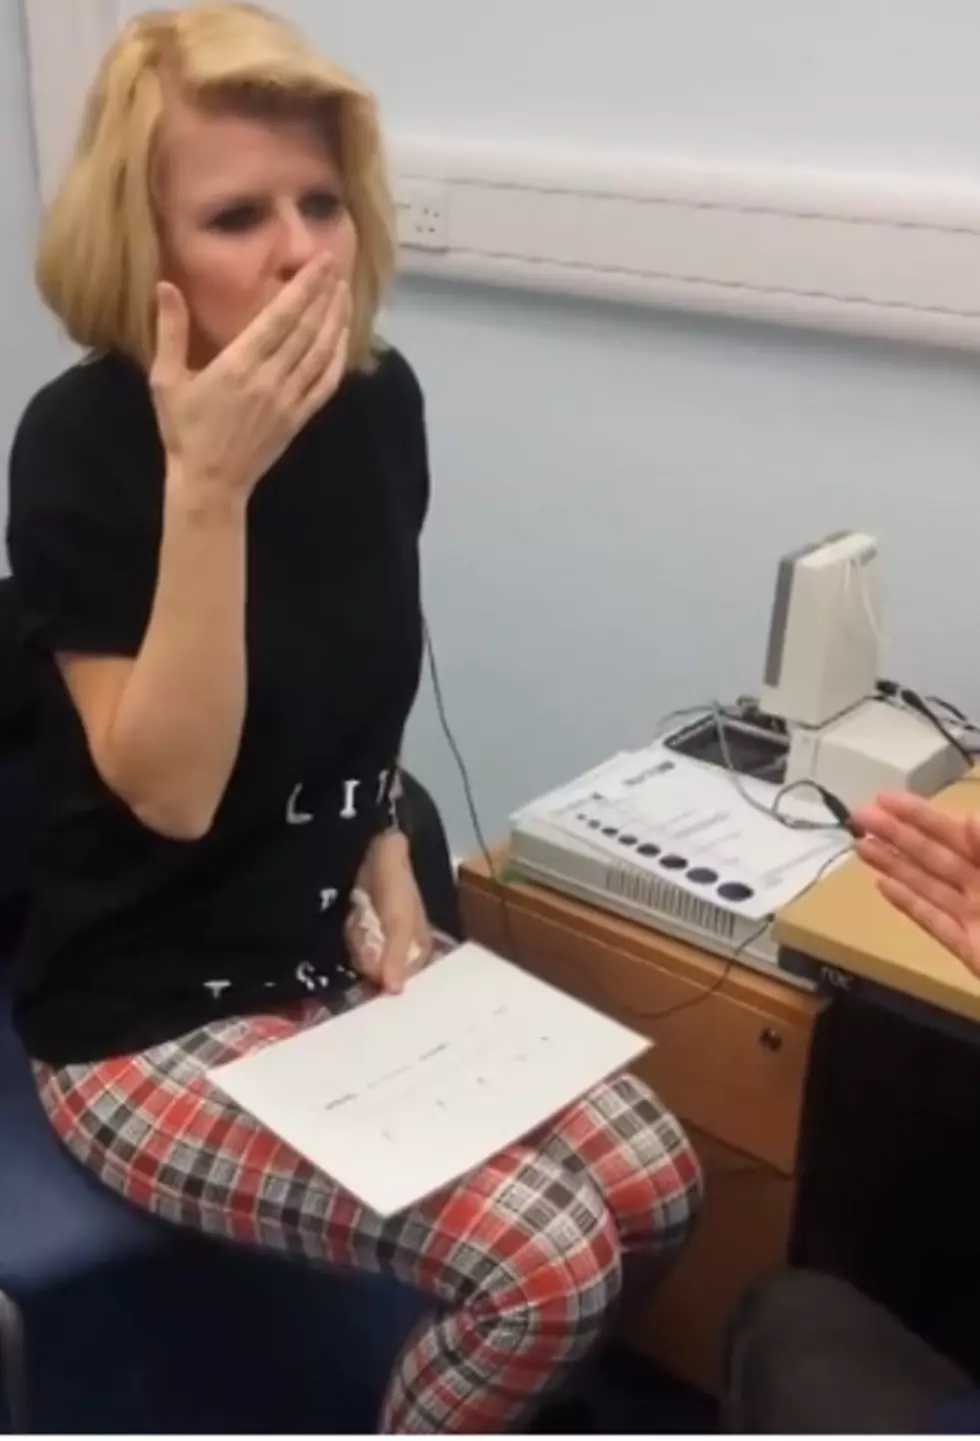 39 Year Old Woman Hears For The First Time [VIDEO]